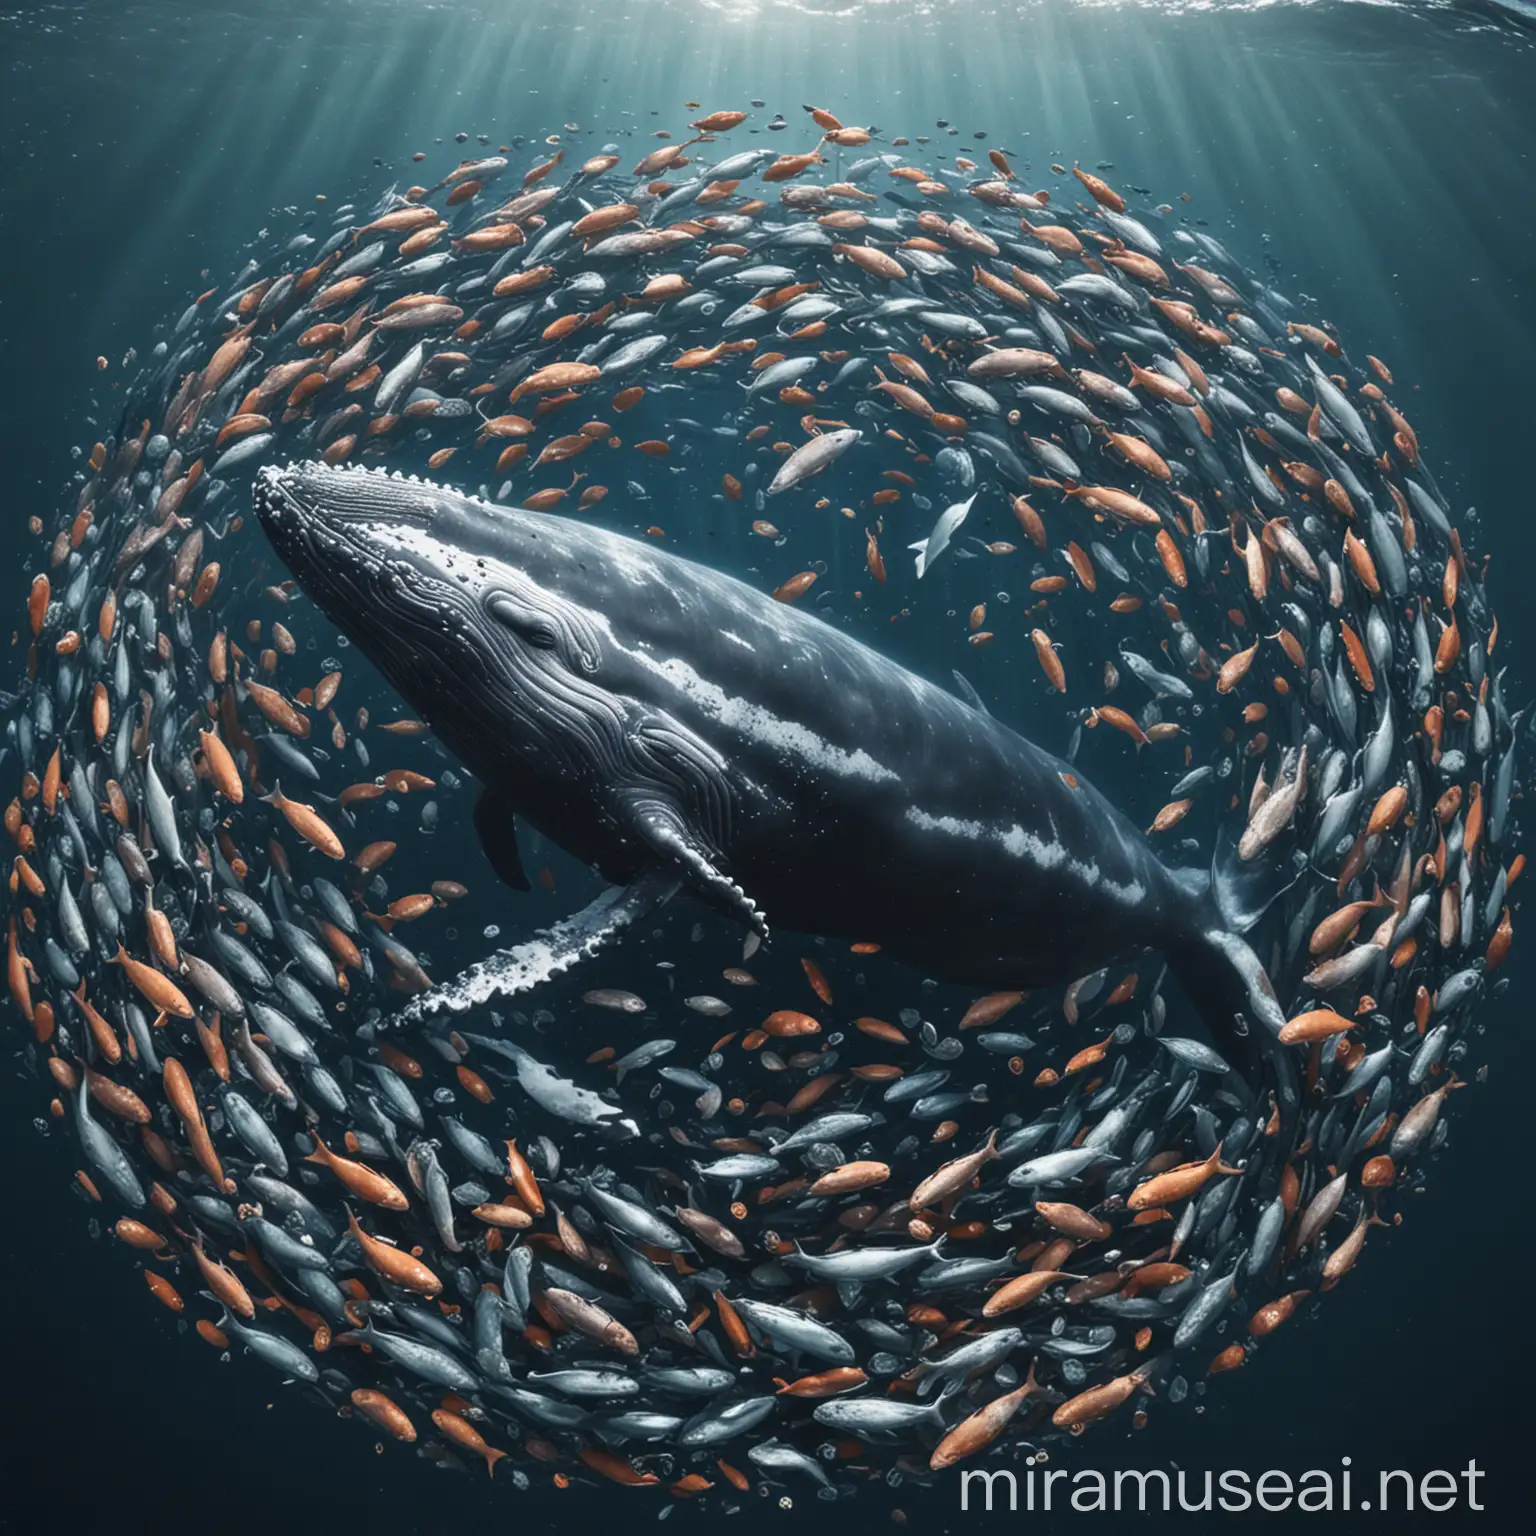 Whale surrounded by fish